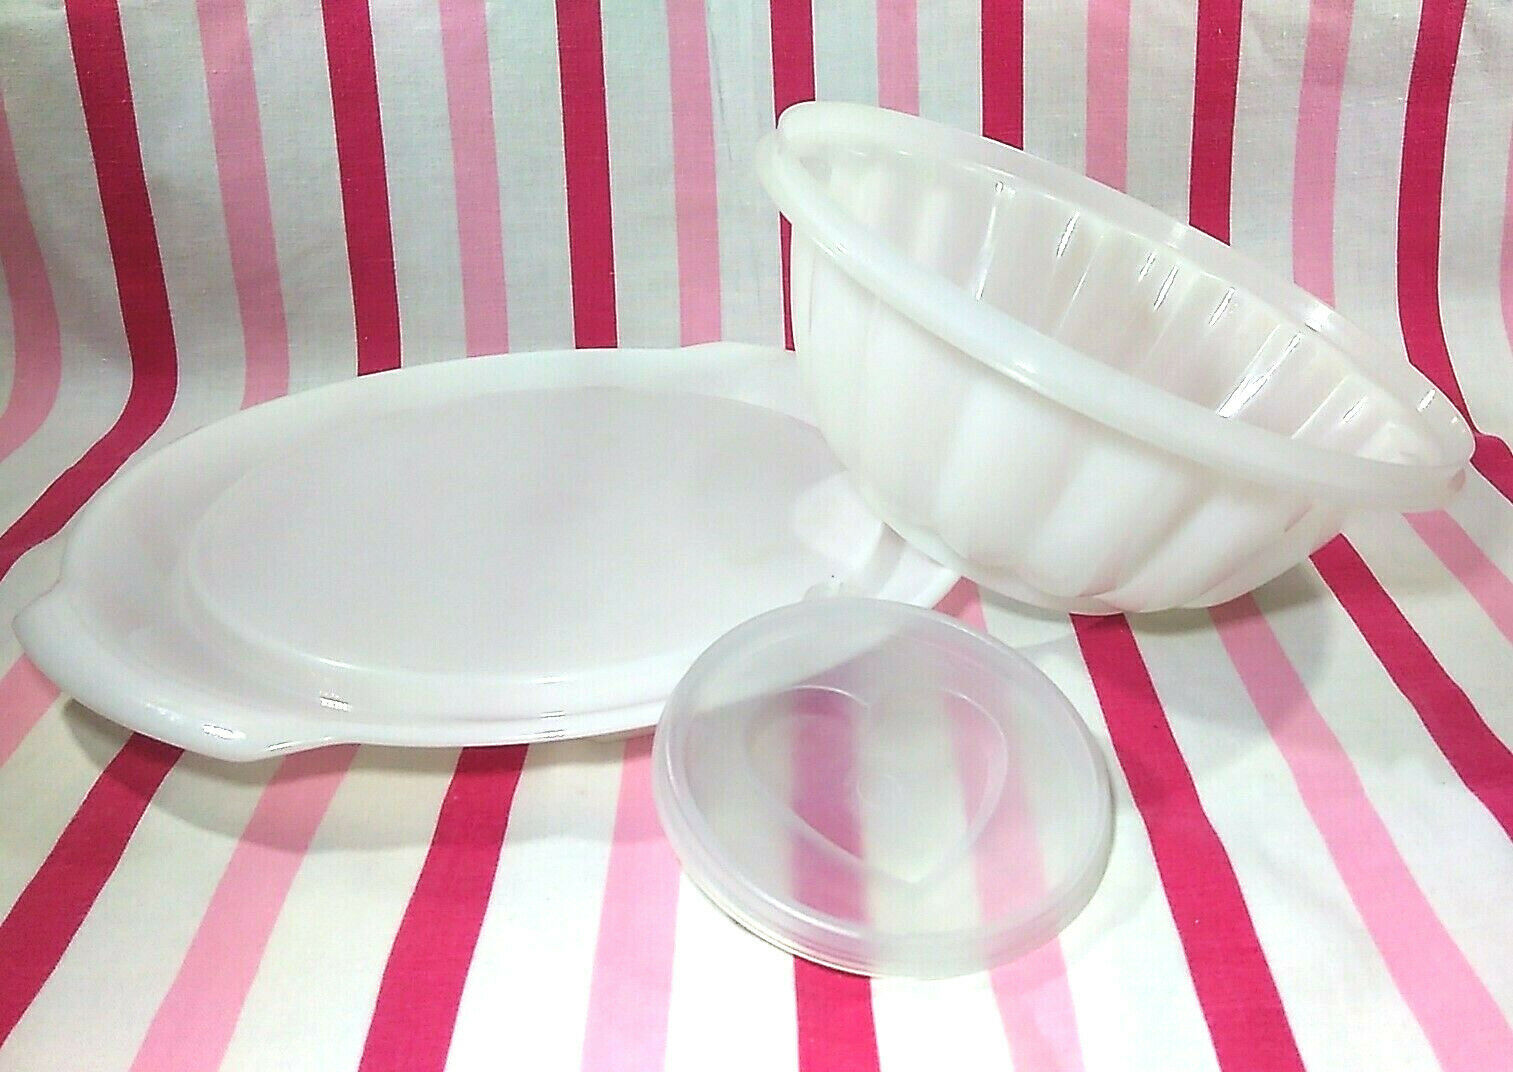 FUN Vintage Tupperware Jel-N-Serve Mold With White Tray and Heart Design Top - $8.00